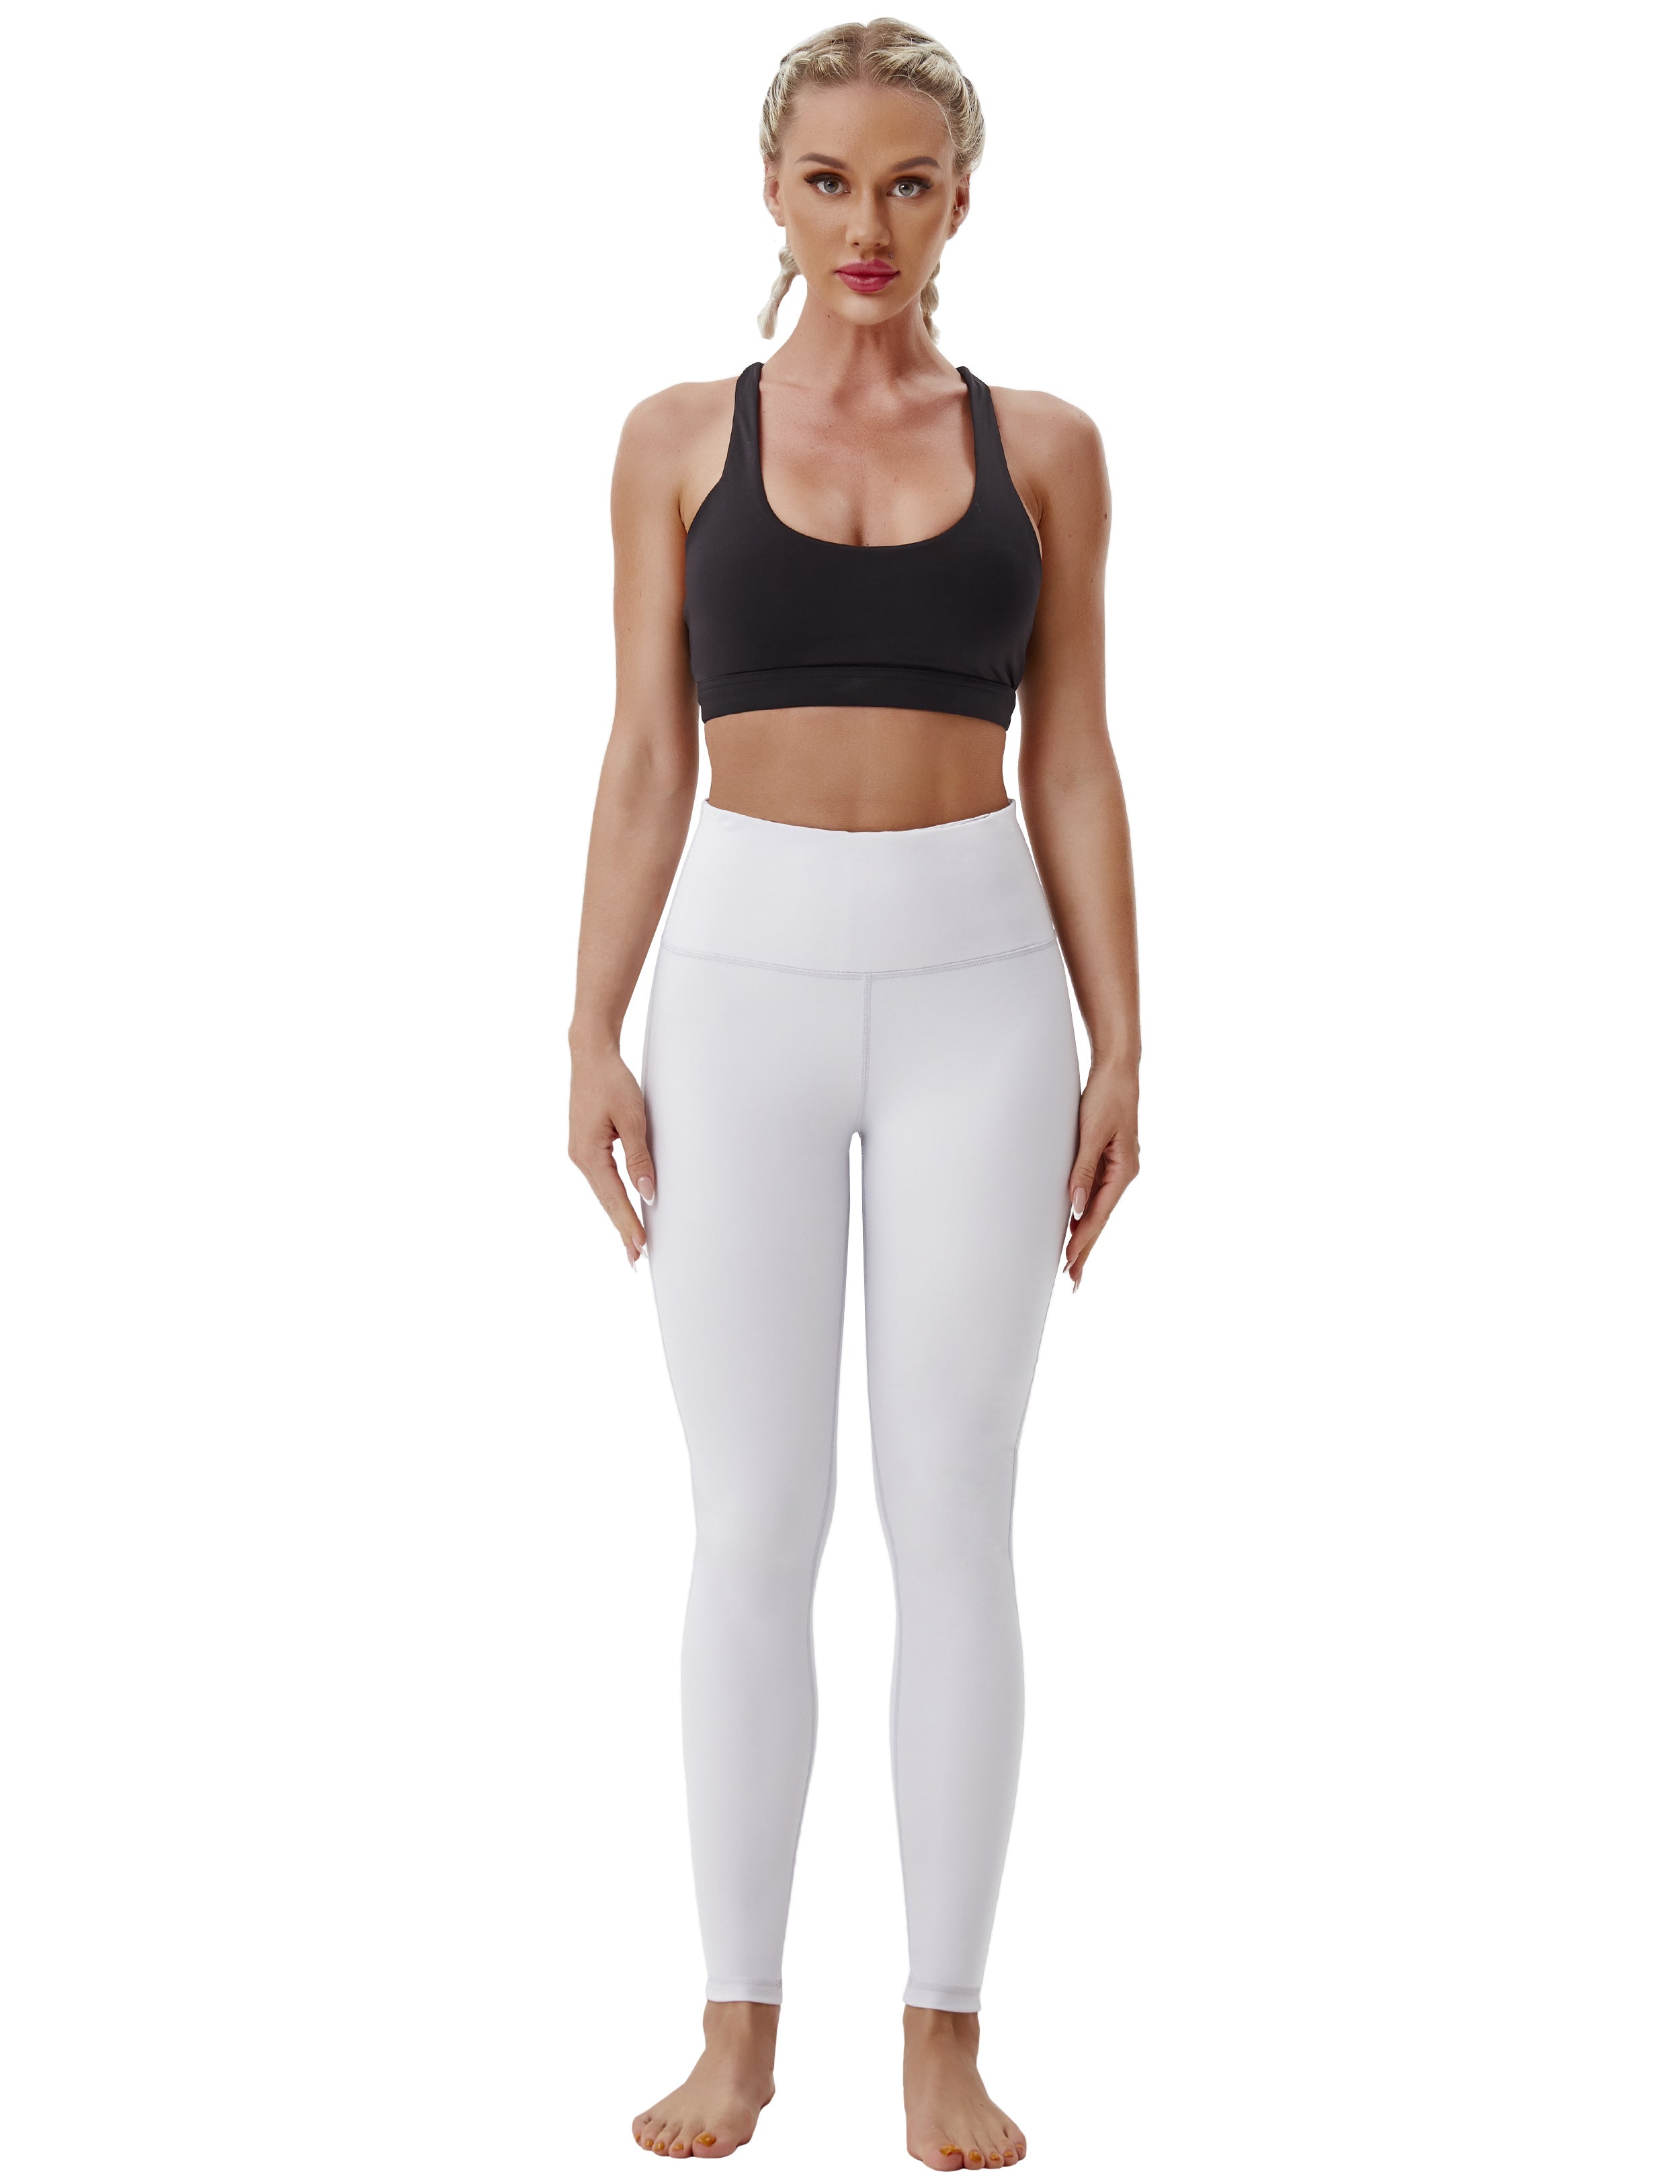 High Waist Side Line Yoga Pants lightgray Side Line is Make Your Legs Look Longer and Thinner 75%Nylon/25%Spandex Fabric doesn't attract lint easily 4-way stretch No see-through Moisture-wicking Tummy control Inner pocket Two lengths